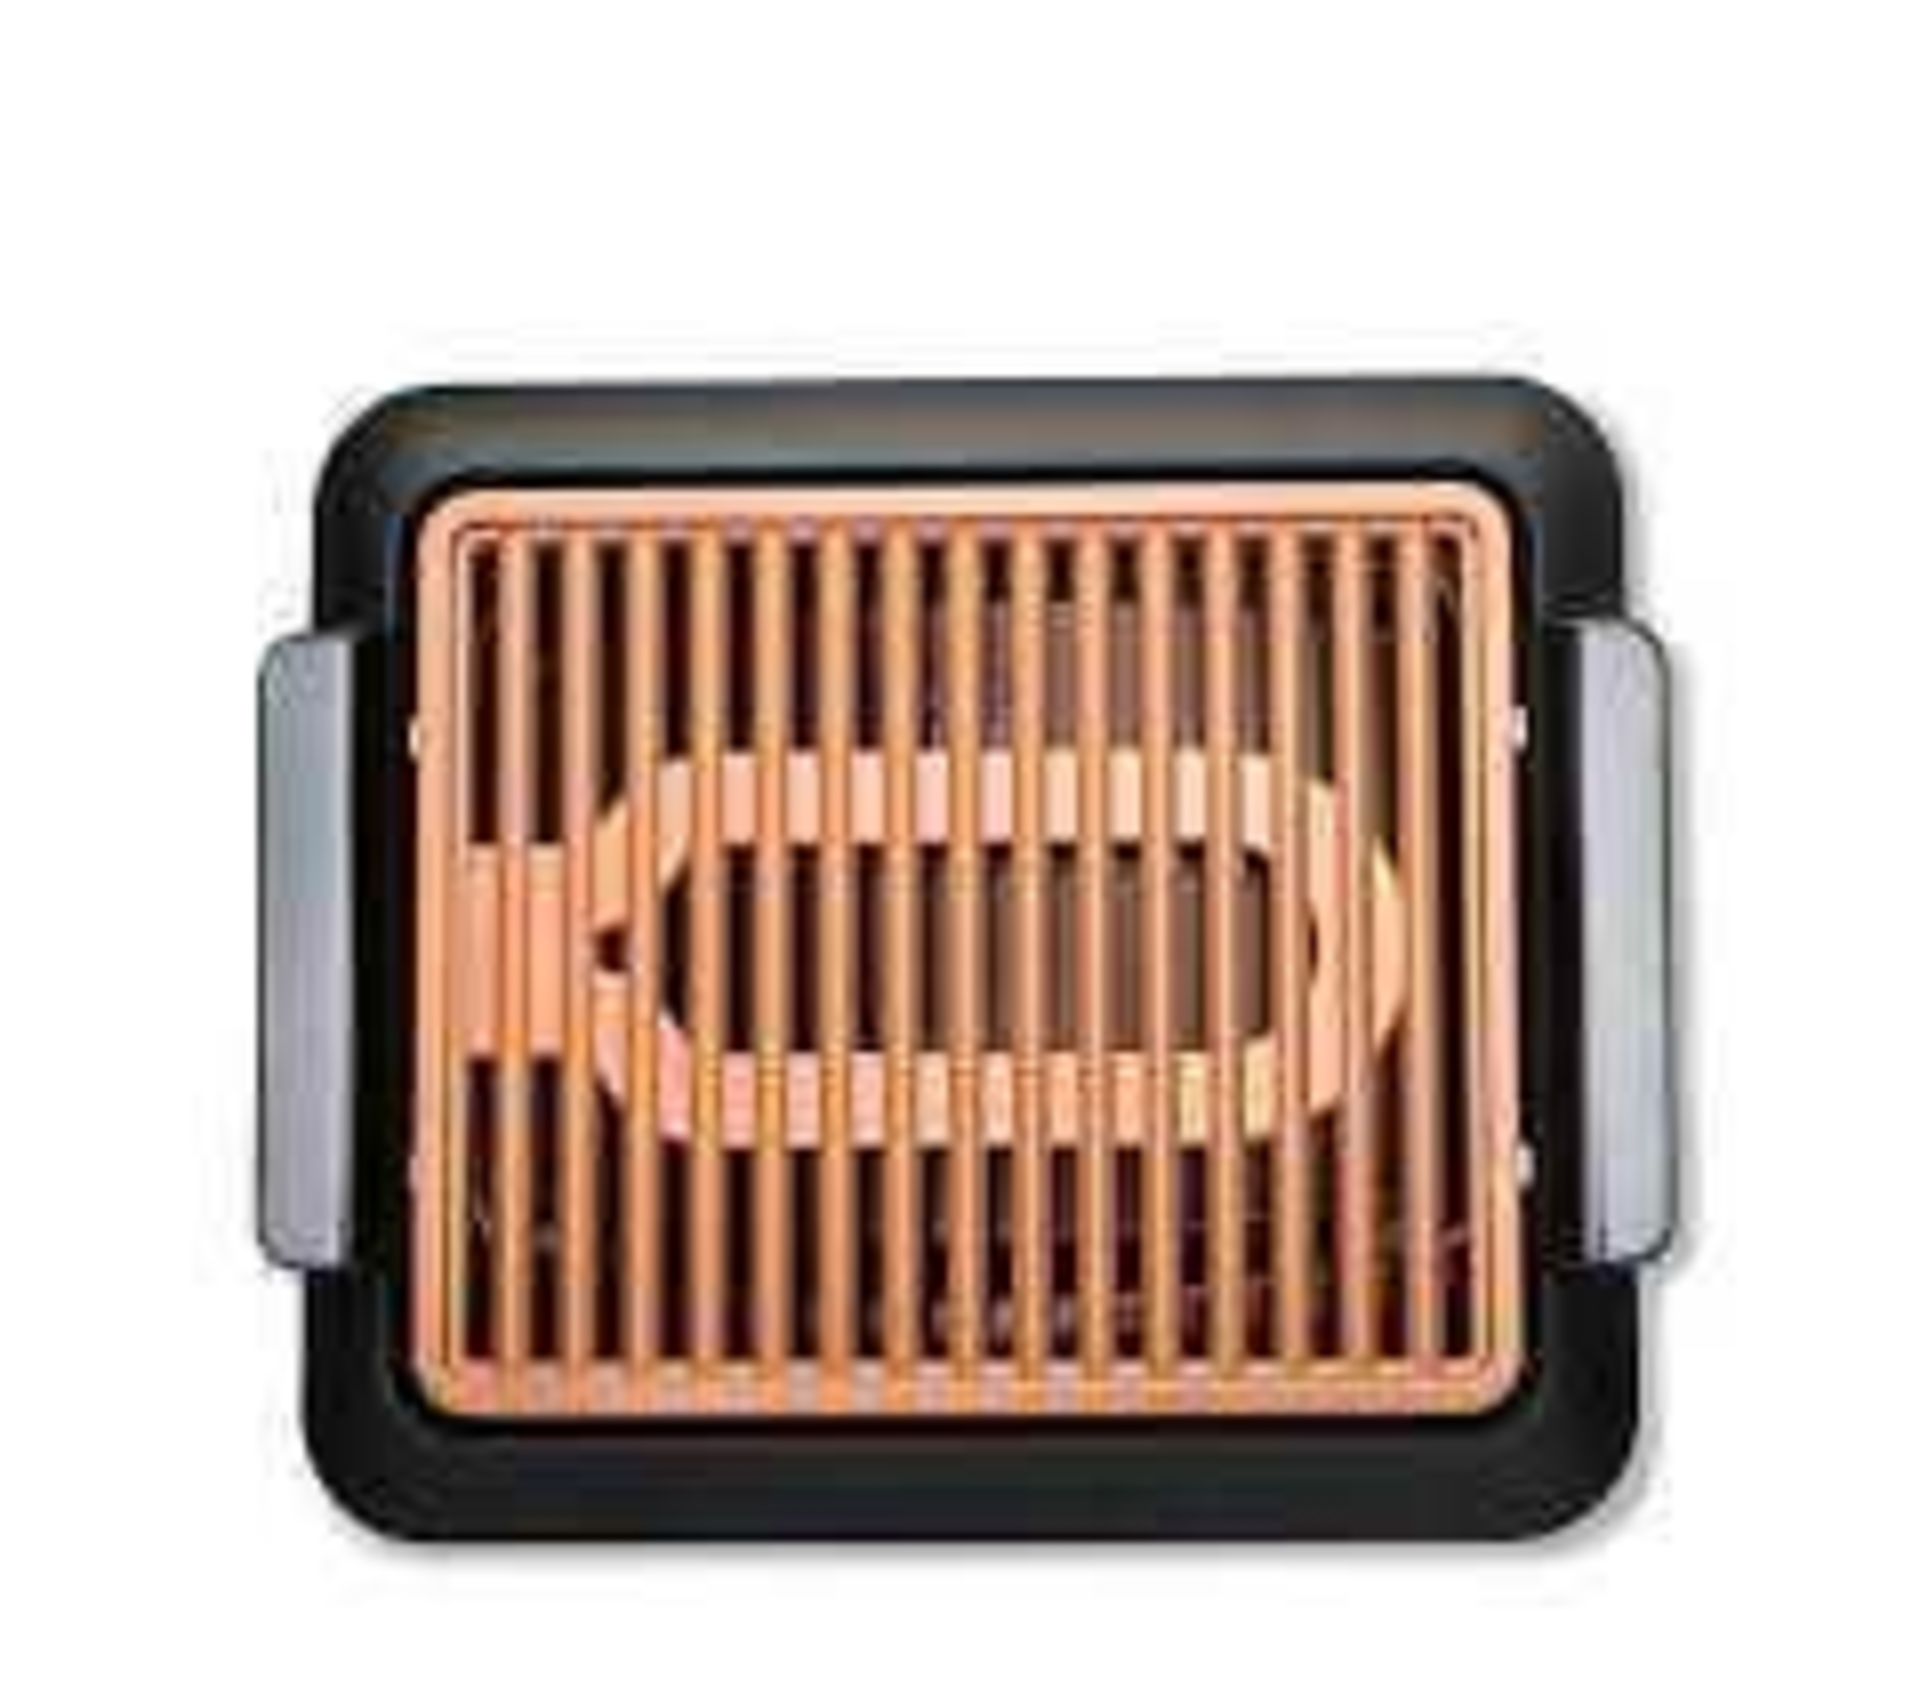 RRP £50 Each Unboxed Gotham Steel Copper Non Stick Grill With Drip Tray